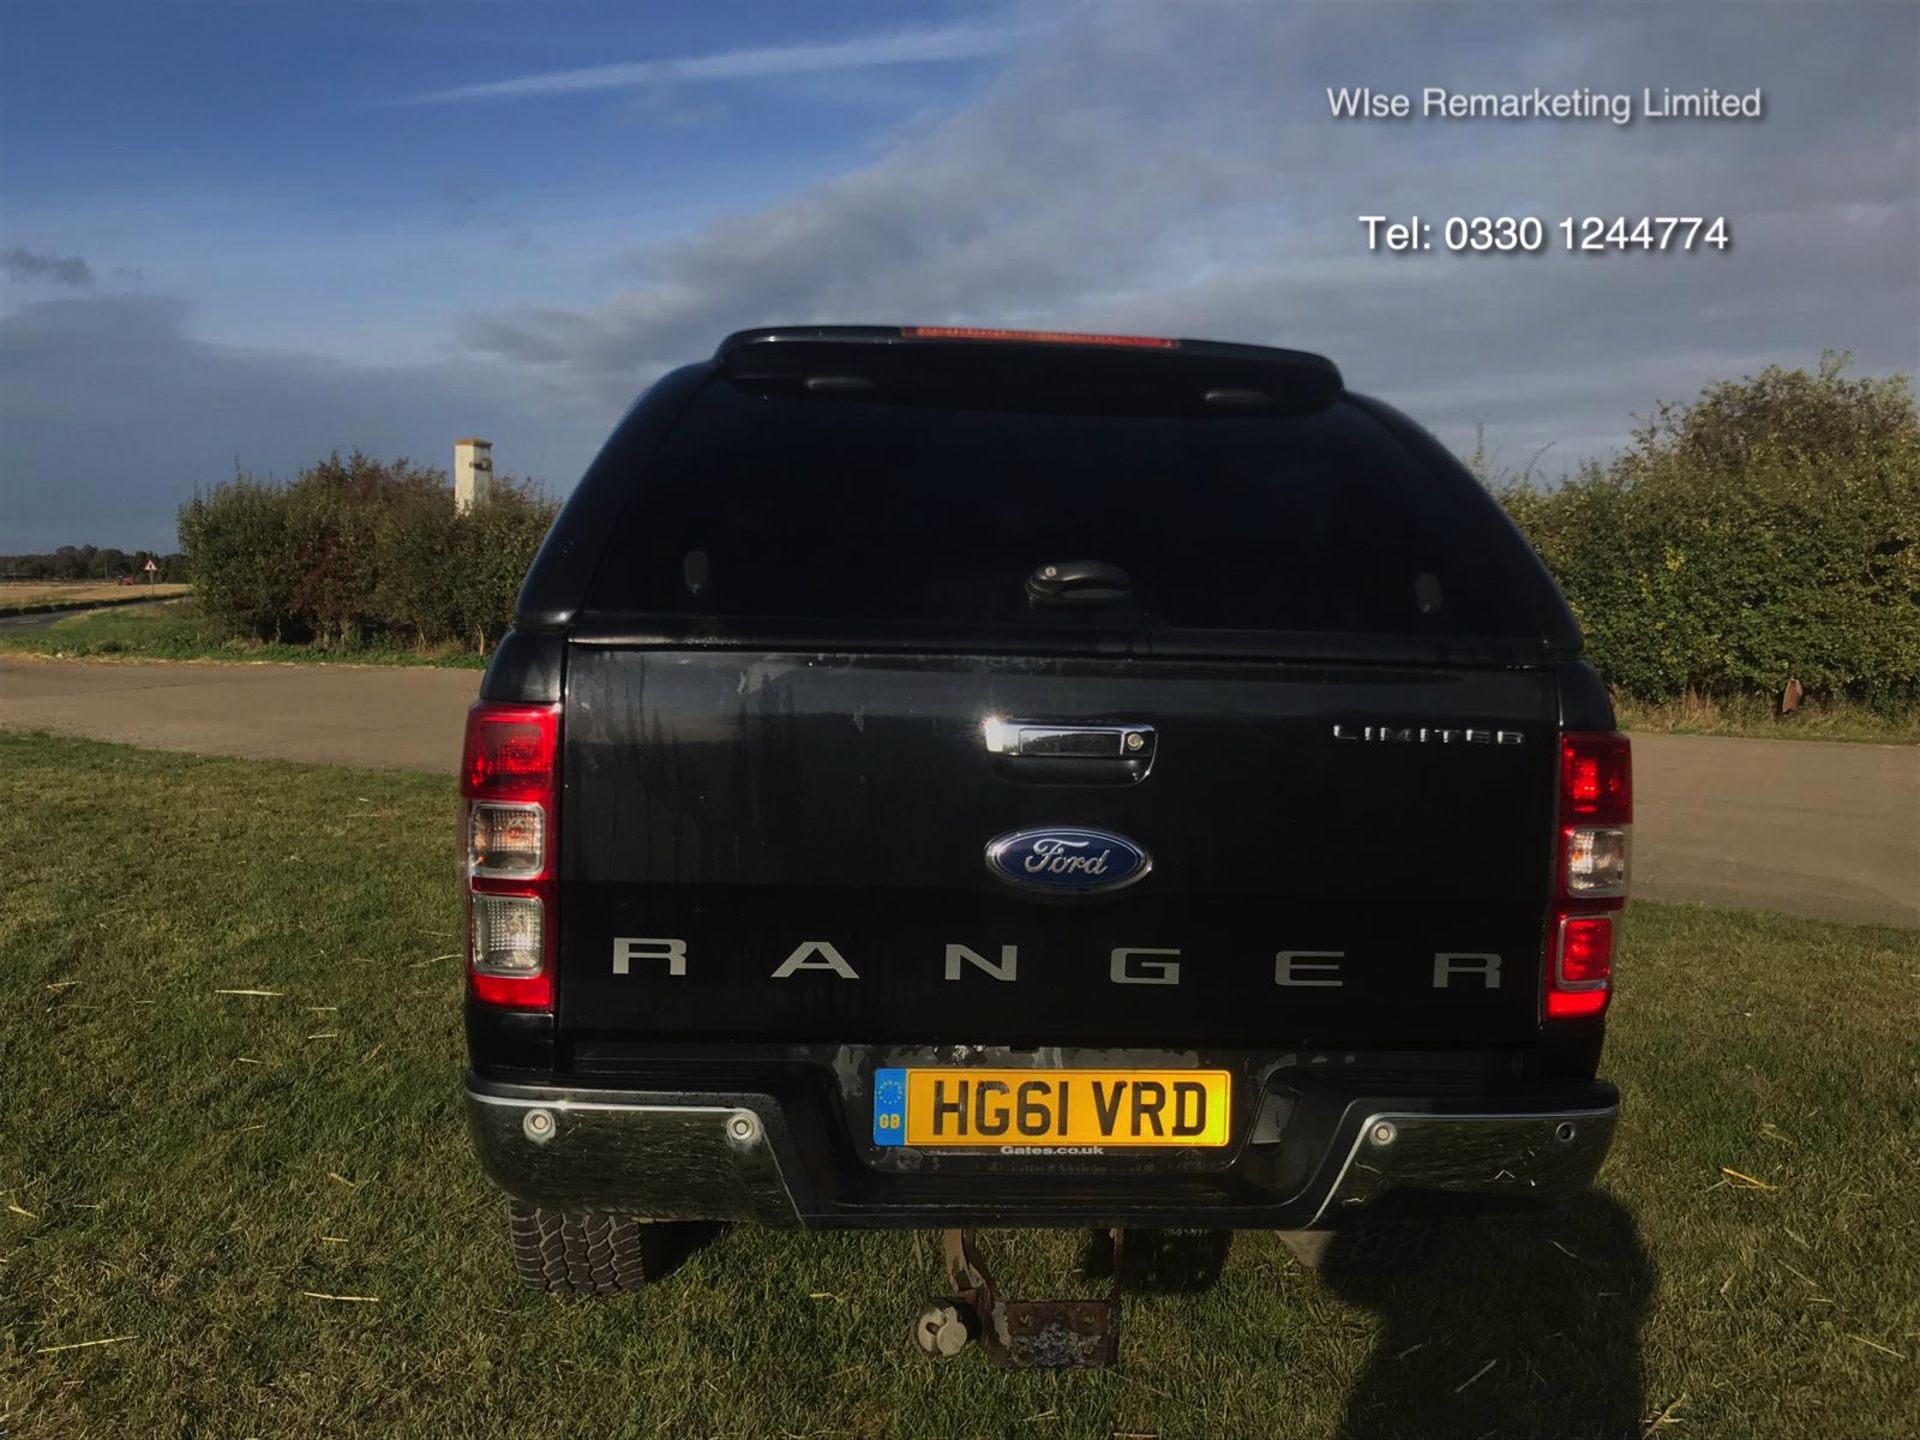 Ford Ranger 3.2l Tdci (200 BHP) Limited 4x4 - 2012 Model - Black - Double Cab - Image 5 of 18